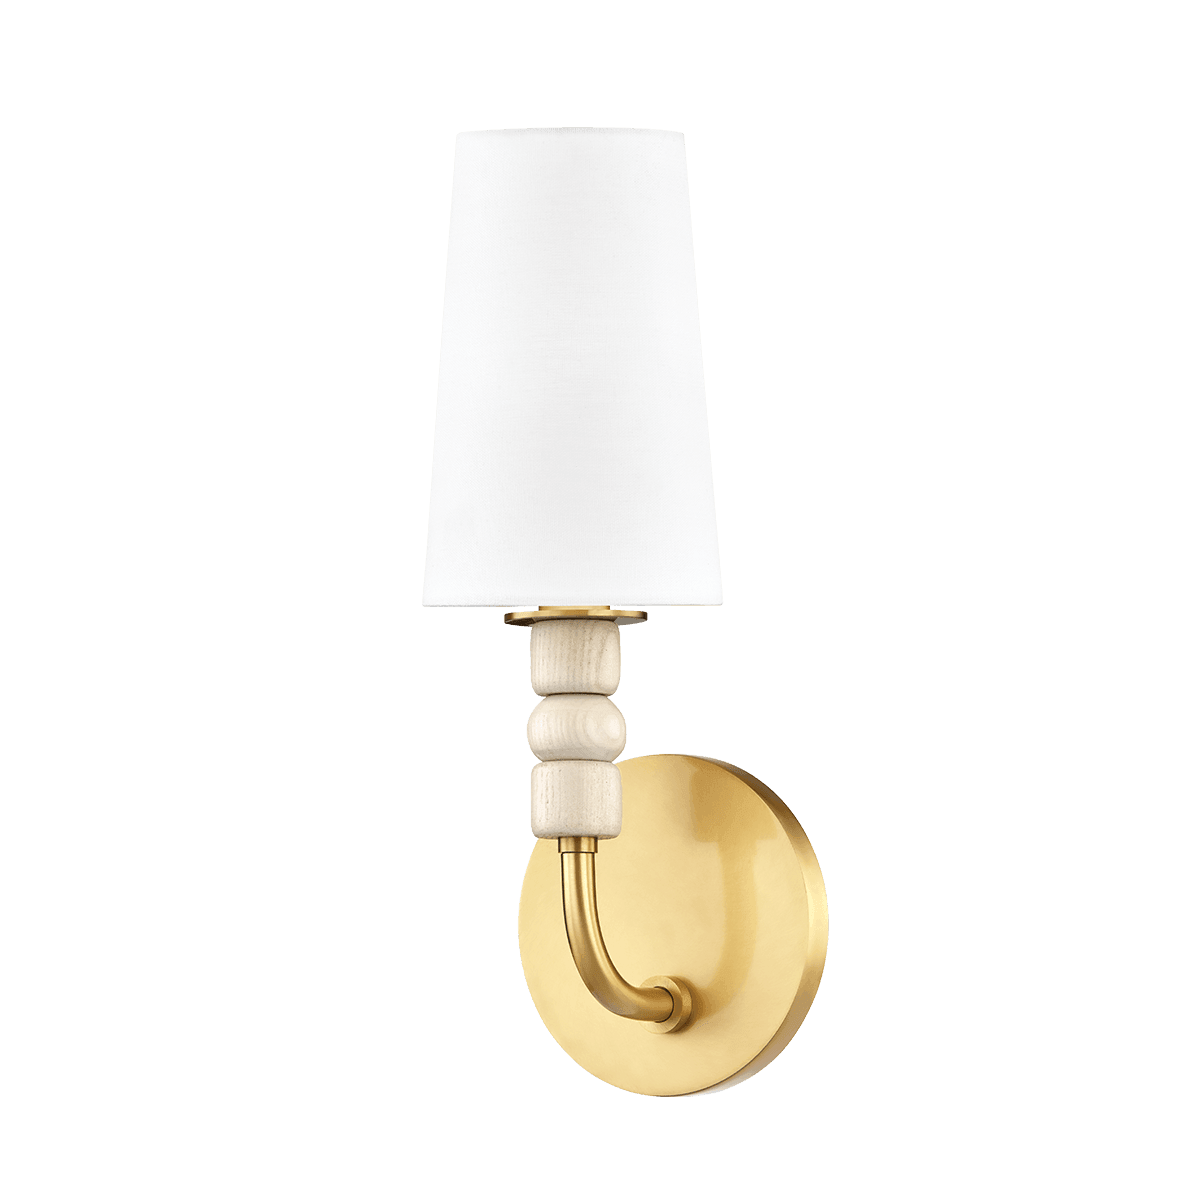 Mitzi - Casey Wall Sconce - H523101-AGB | Montreal Lighting & Hardware